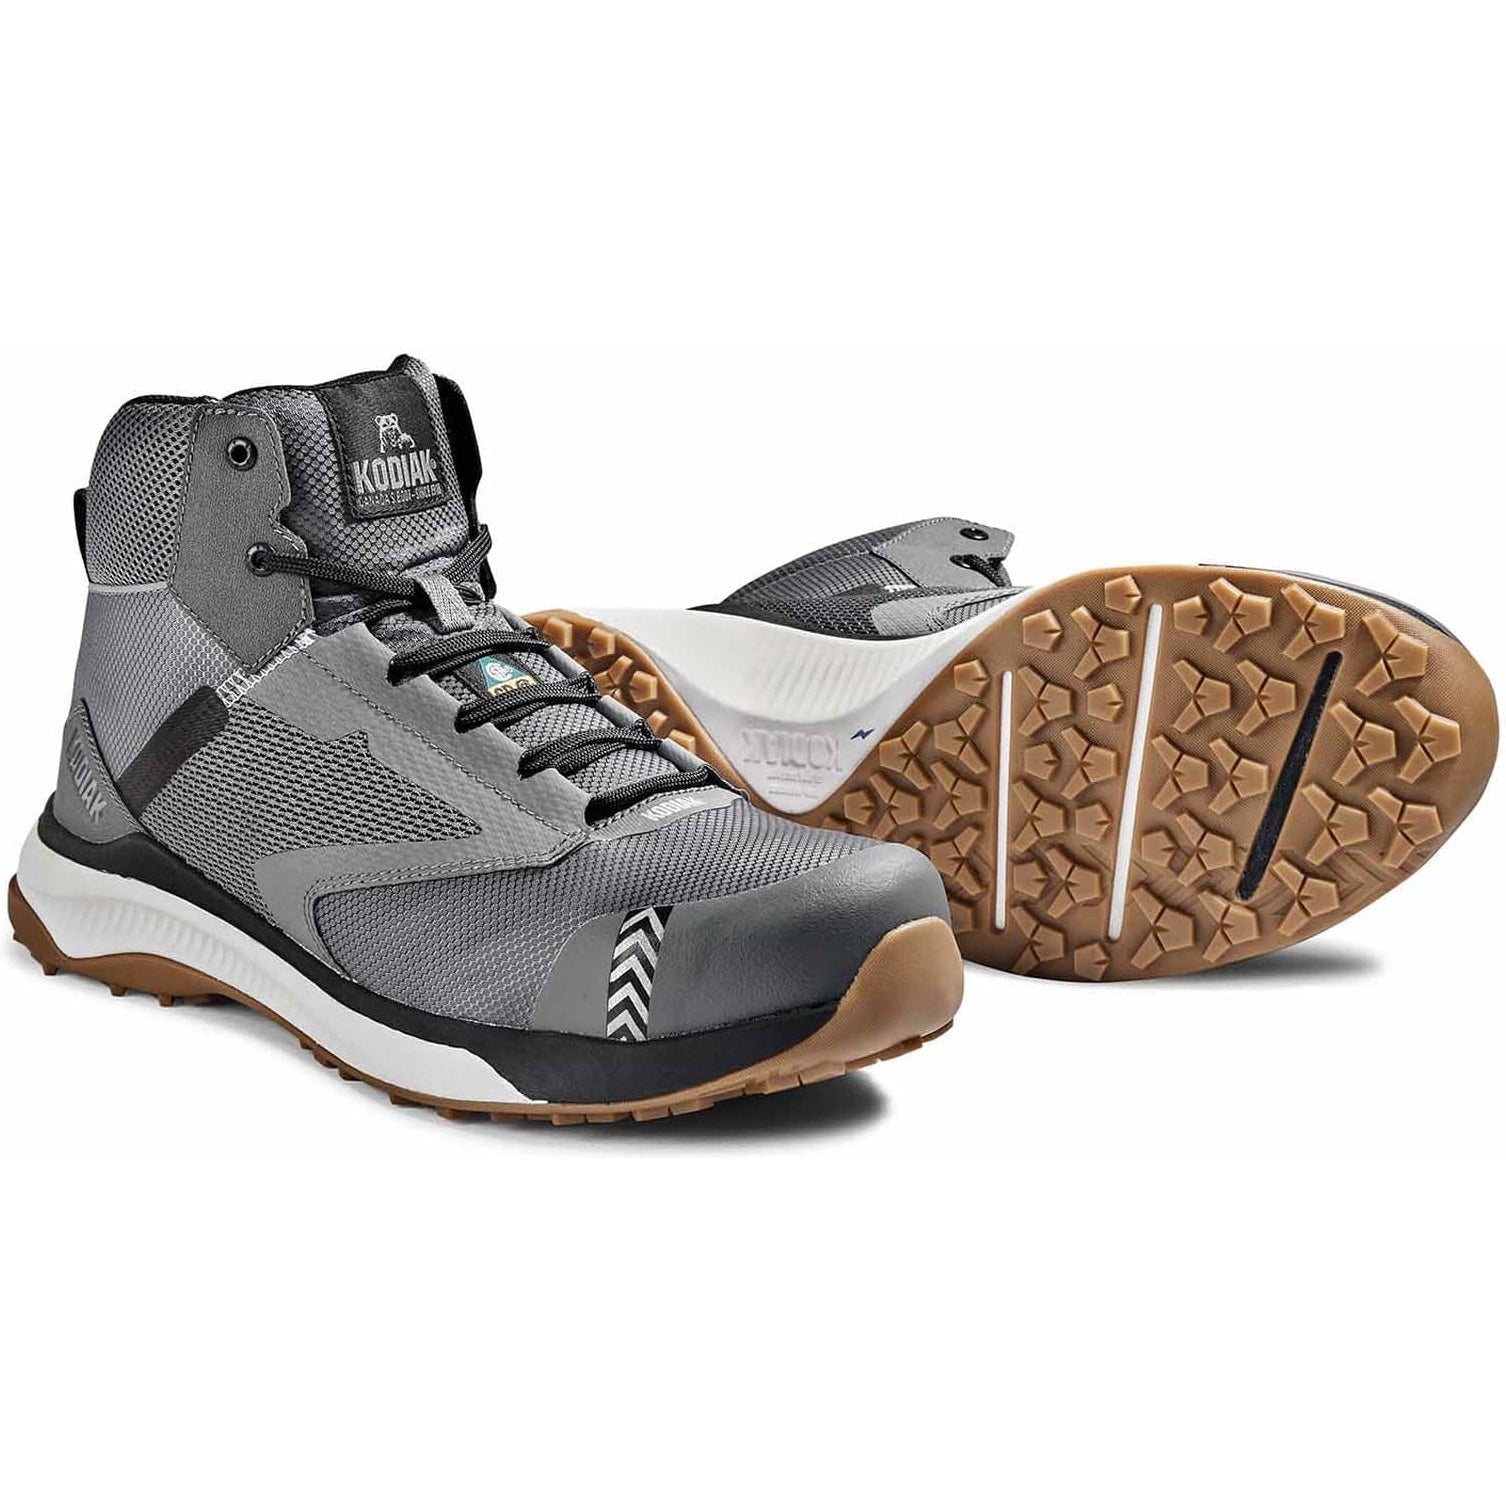 Kodiak Men's Quicktrail Mid CT Athletic Safety Work Shoe -Gray- 4TF5GY  - Overlook Boots